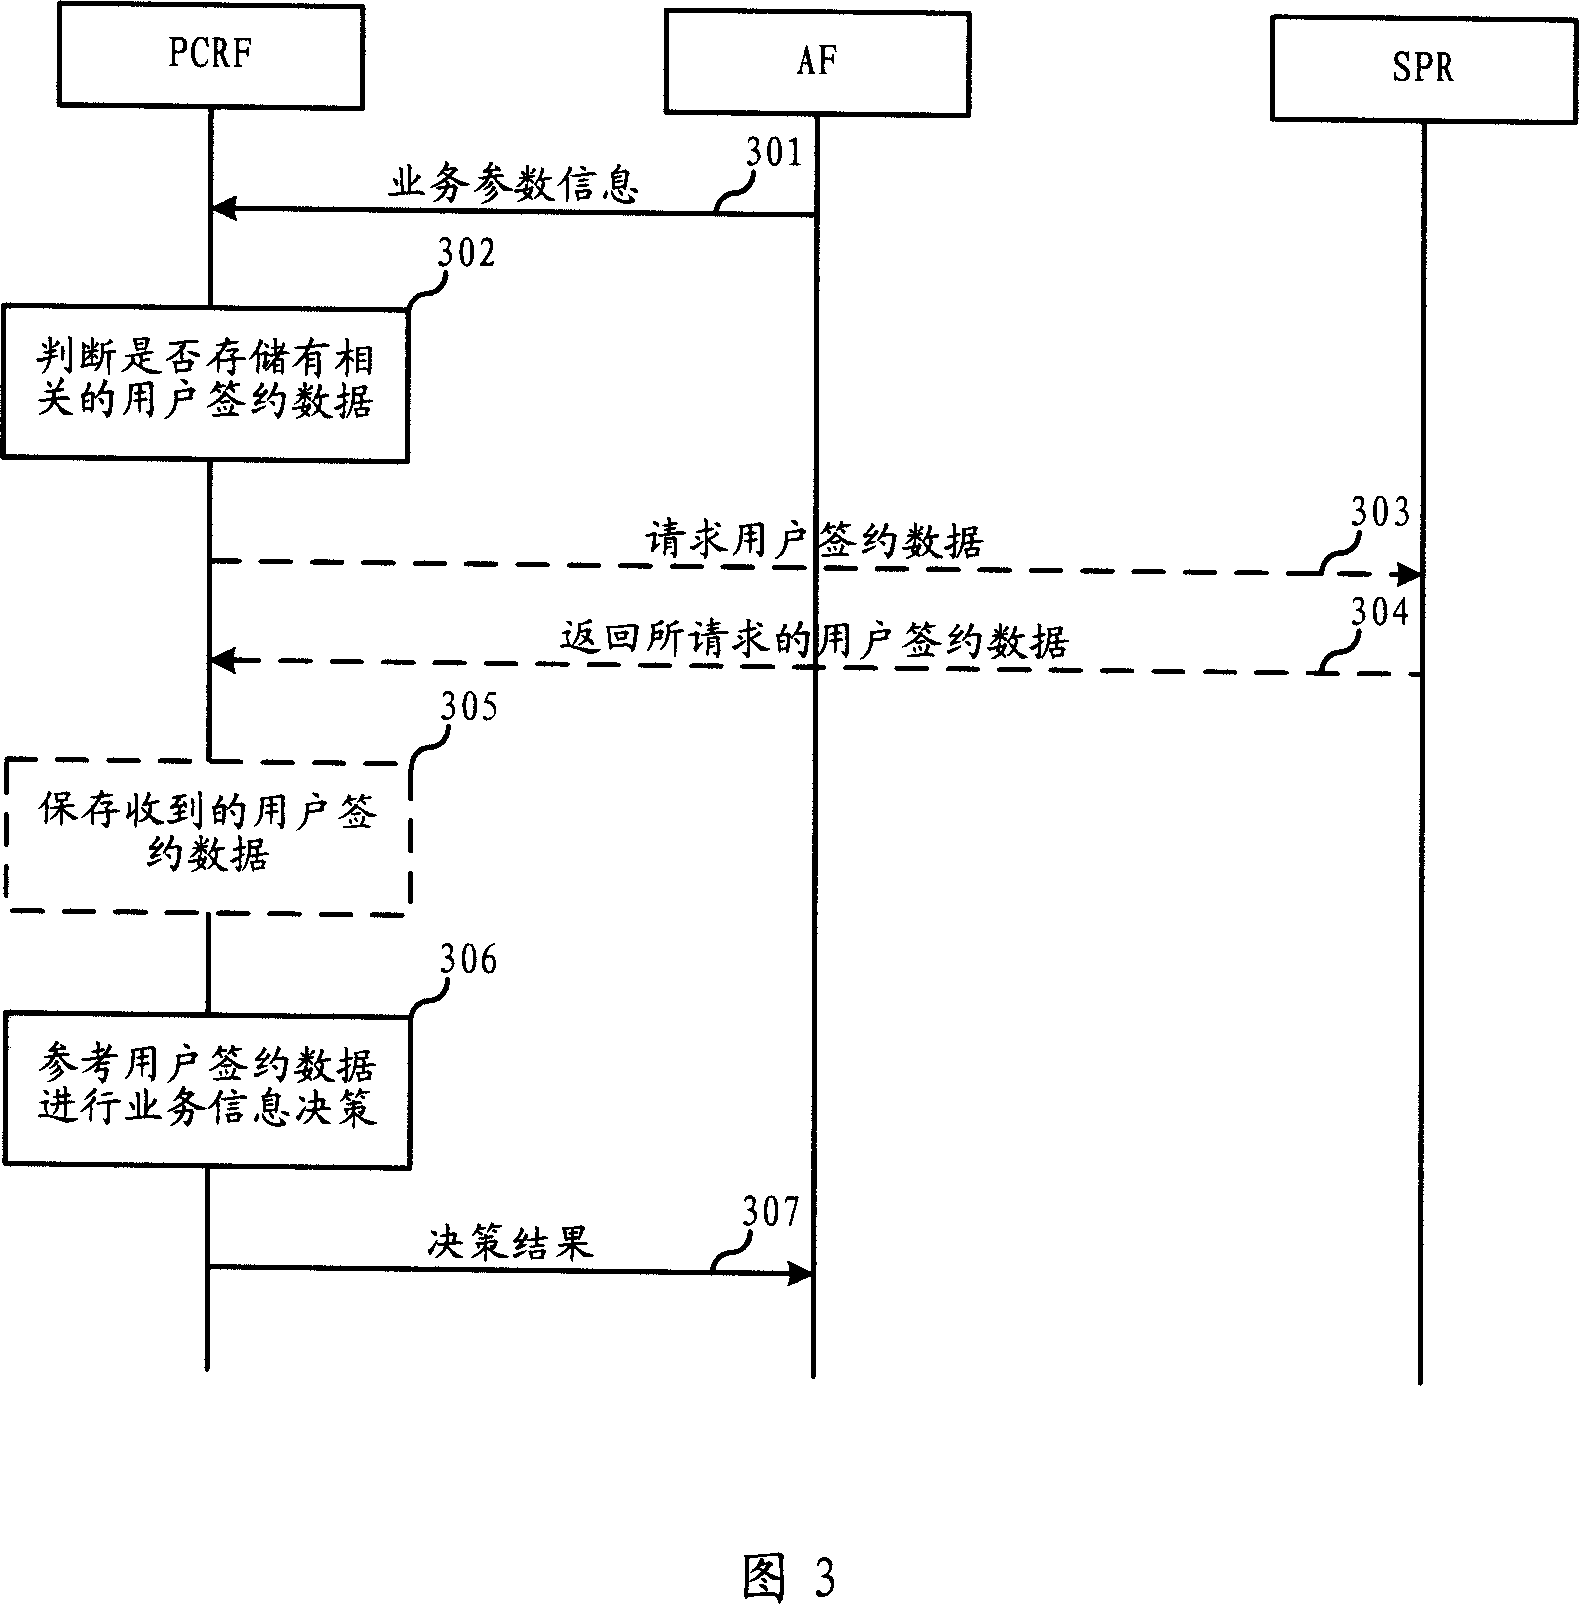 Decision method for service information in mobile communication network